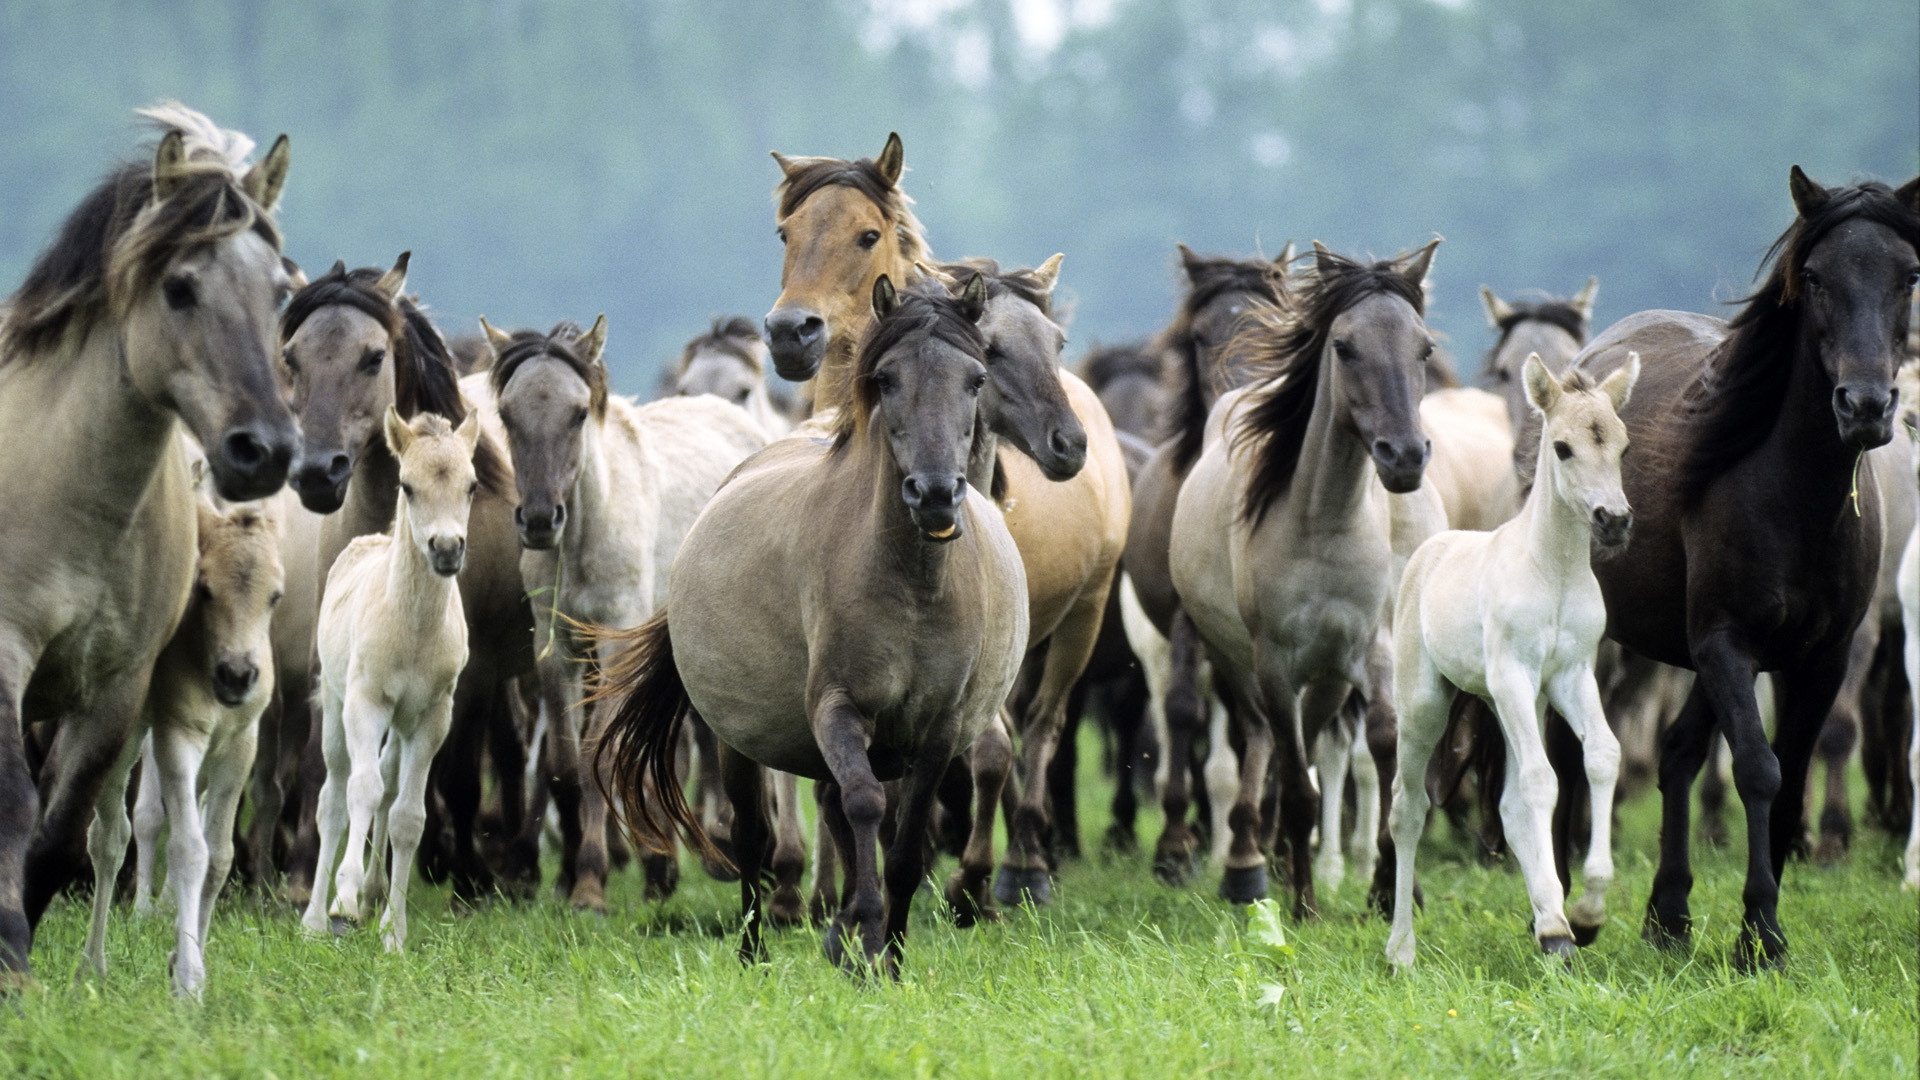 1920x1080 gif horse images | Three Horses Wild Animal Wallpaper with   Resolution